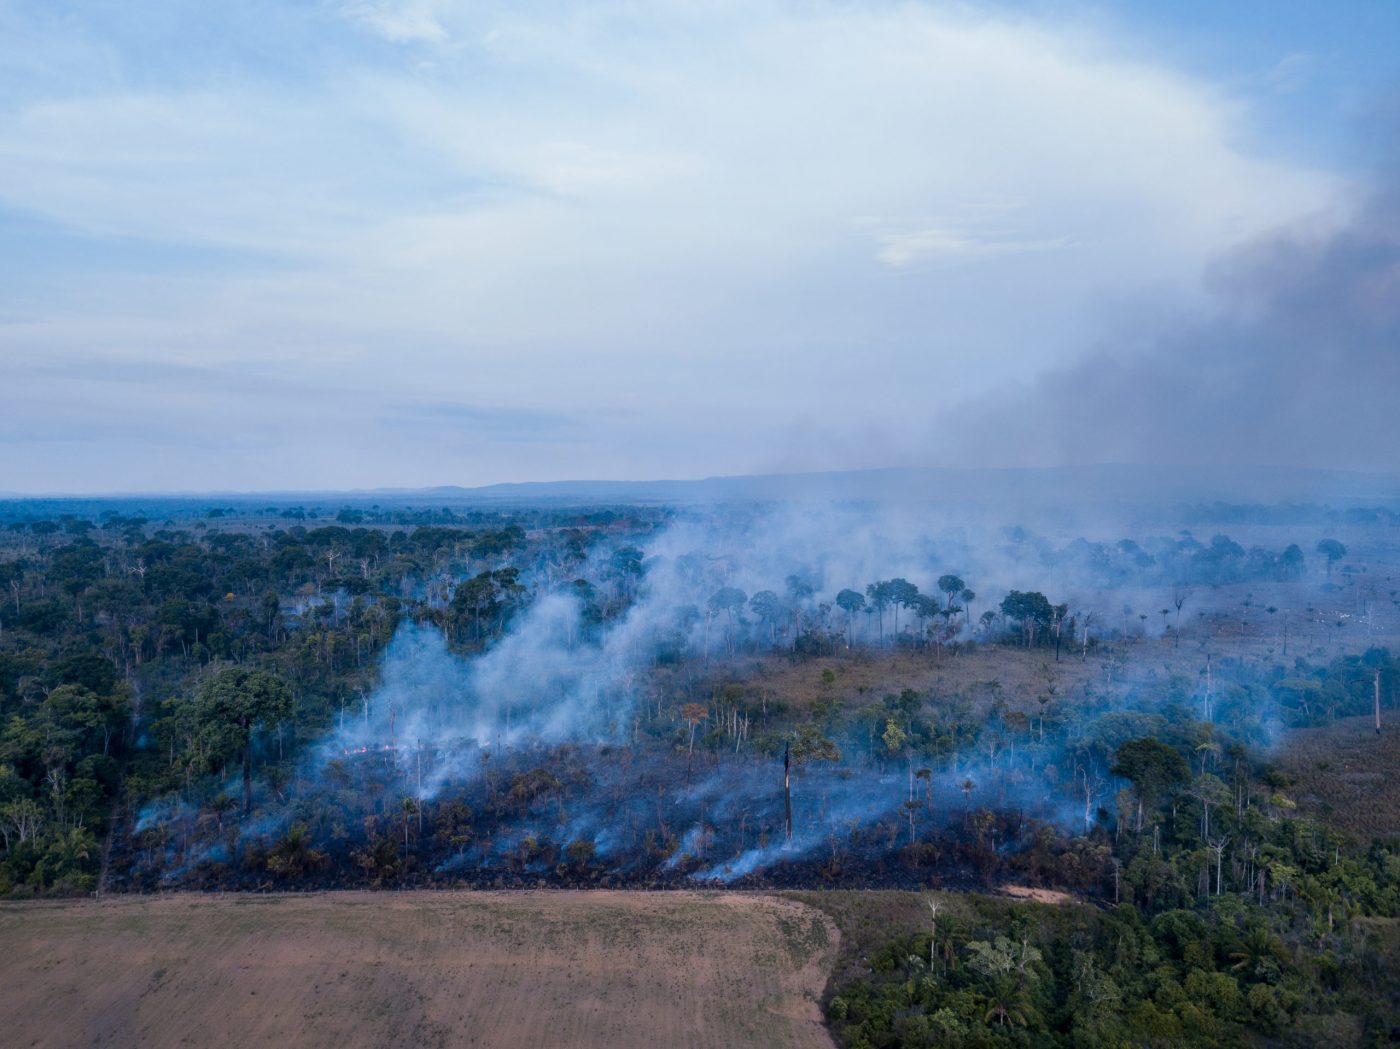 Burning of the Amazon rainforest at dusk to increase livestock grazing area and agriculture activities Area already deforested in the foreground.